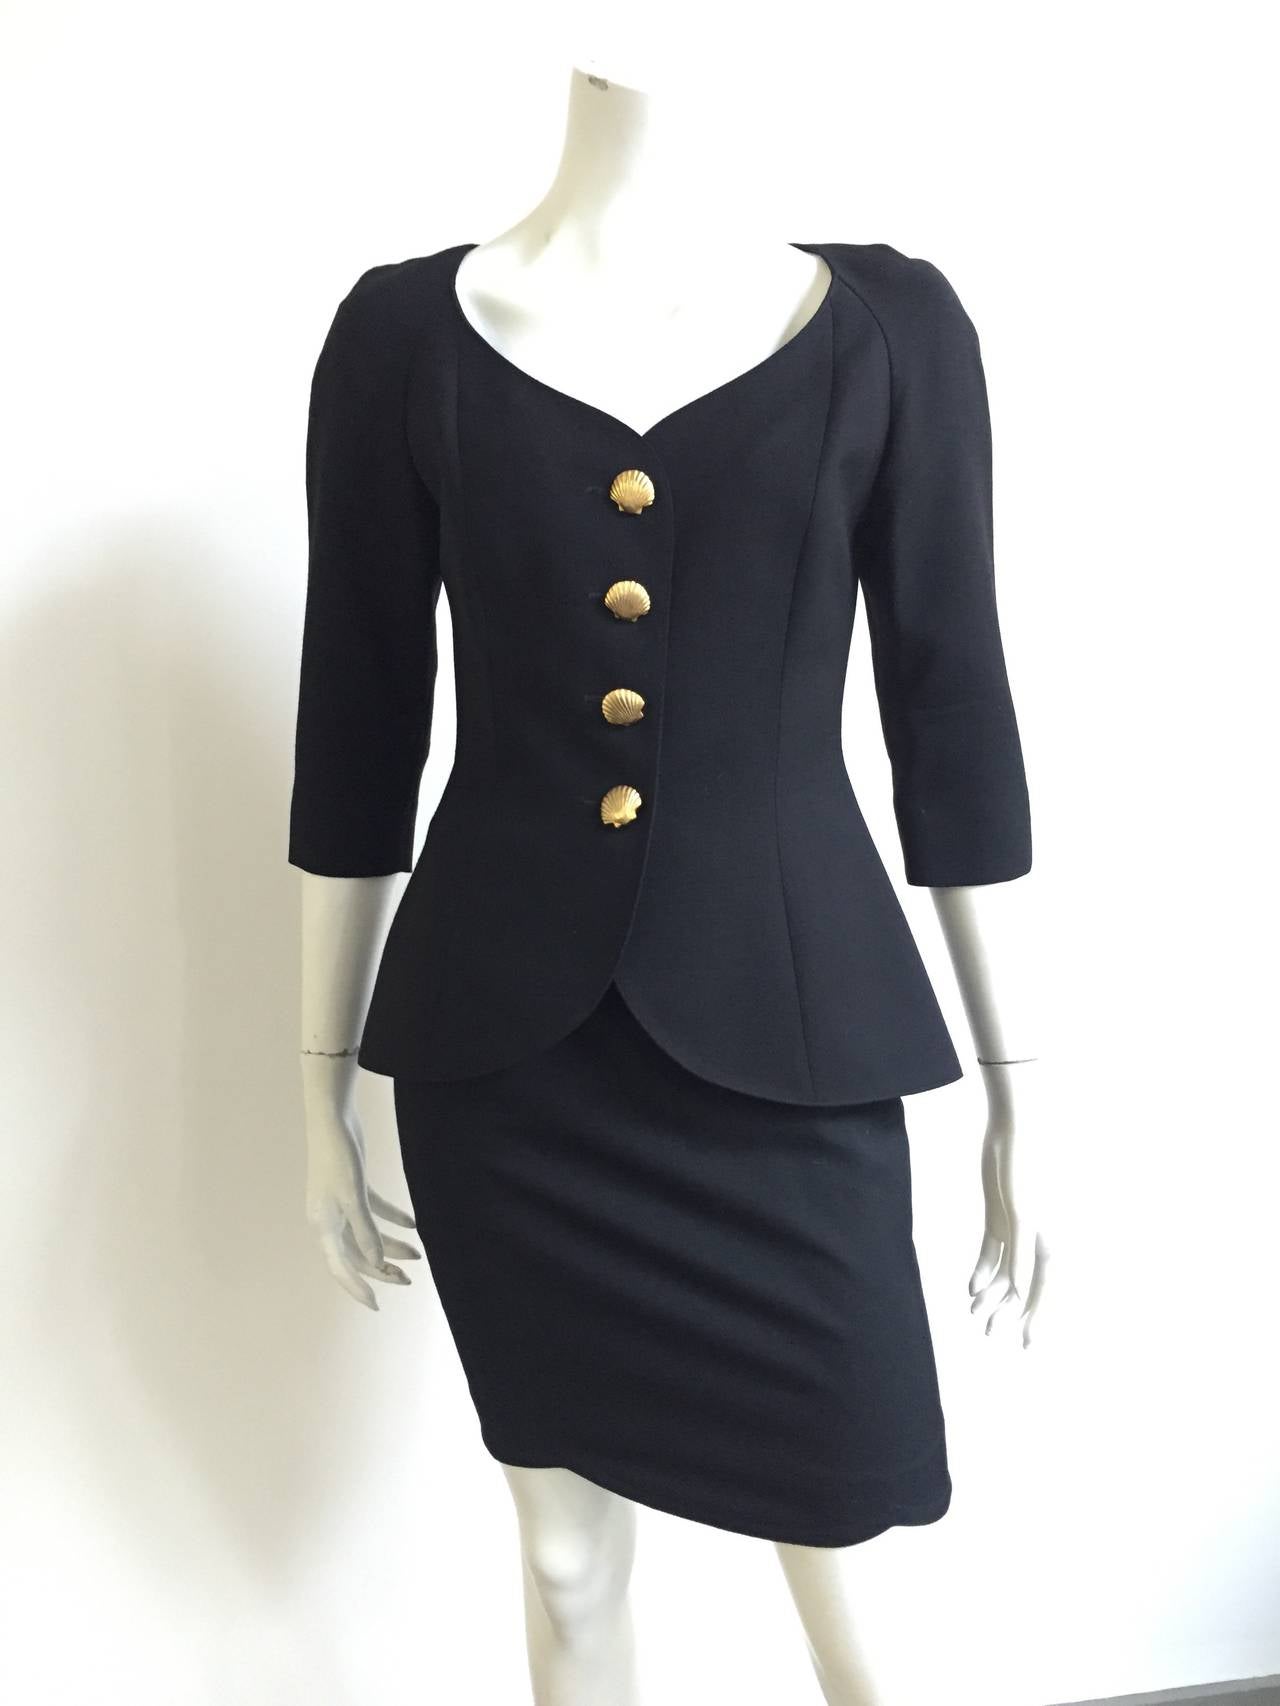 Lolita Lempicka Paris 1980s black wool skirt suit with gold shell buttons and 3/4 sleeves. Jacket and skirt lined.  Jacket has open dart on backside. 
Measurements are: Please use measurements to measure your body.
JACKET:
34.5